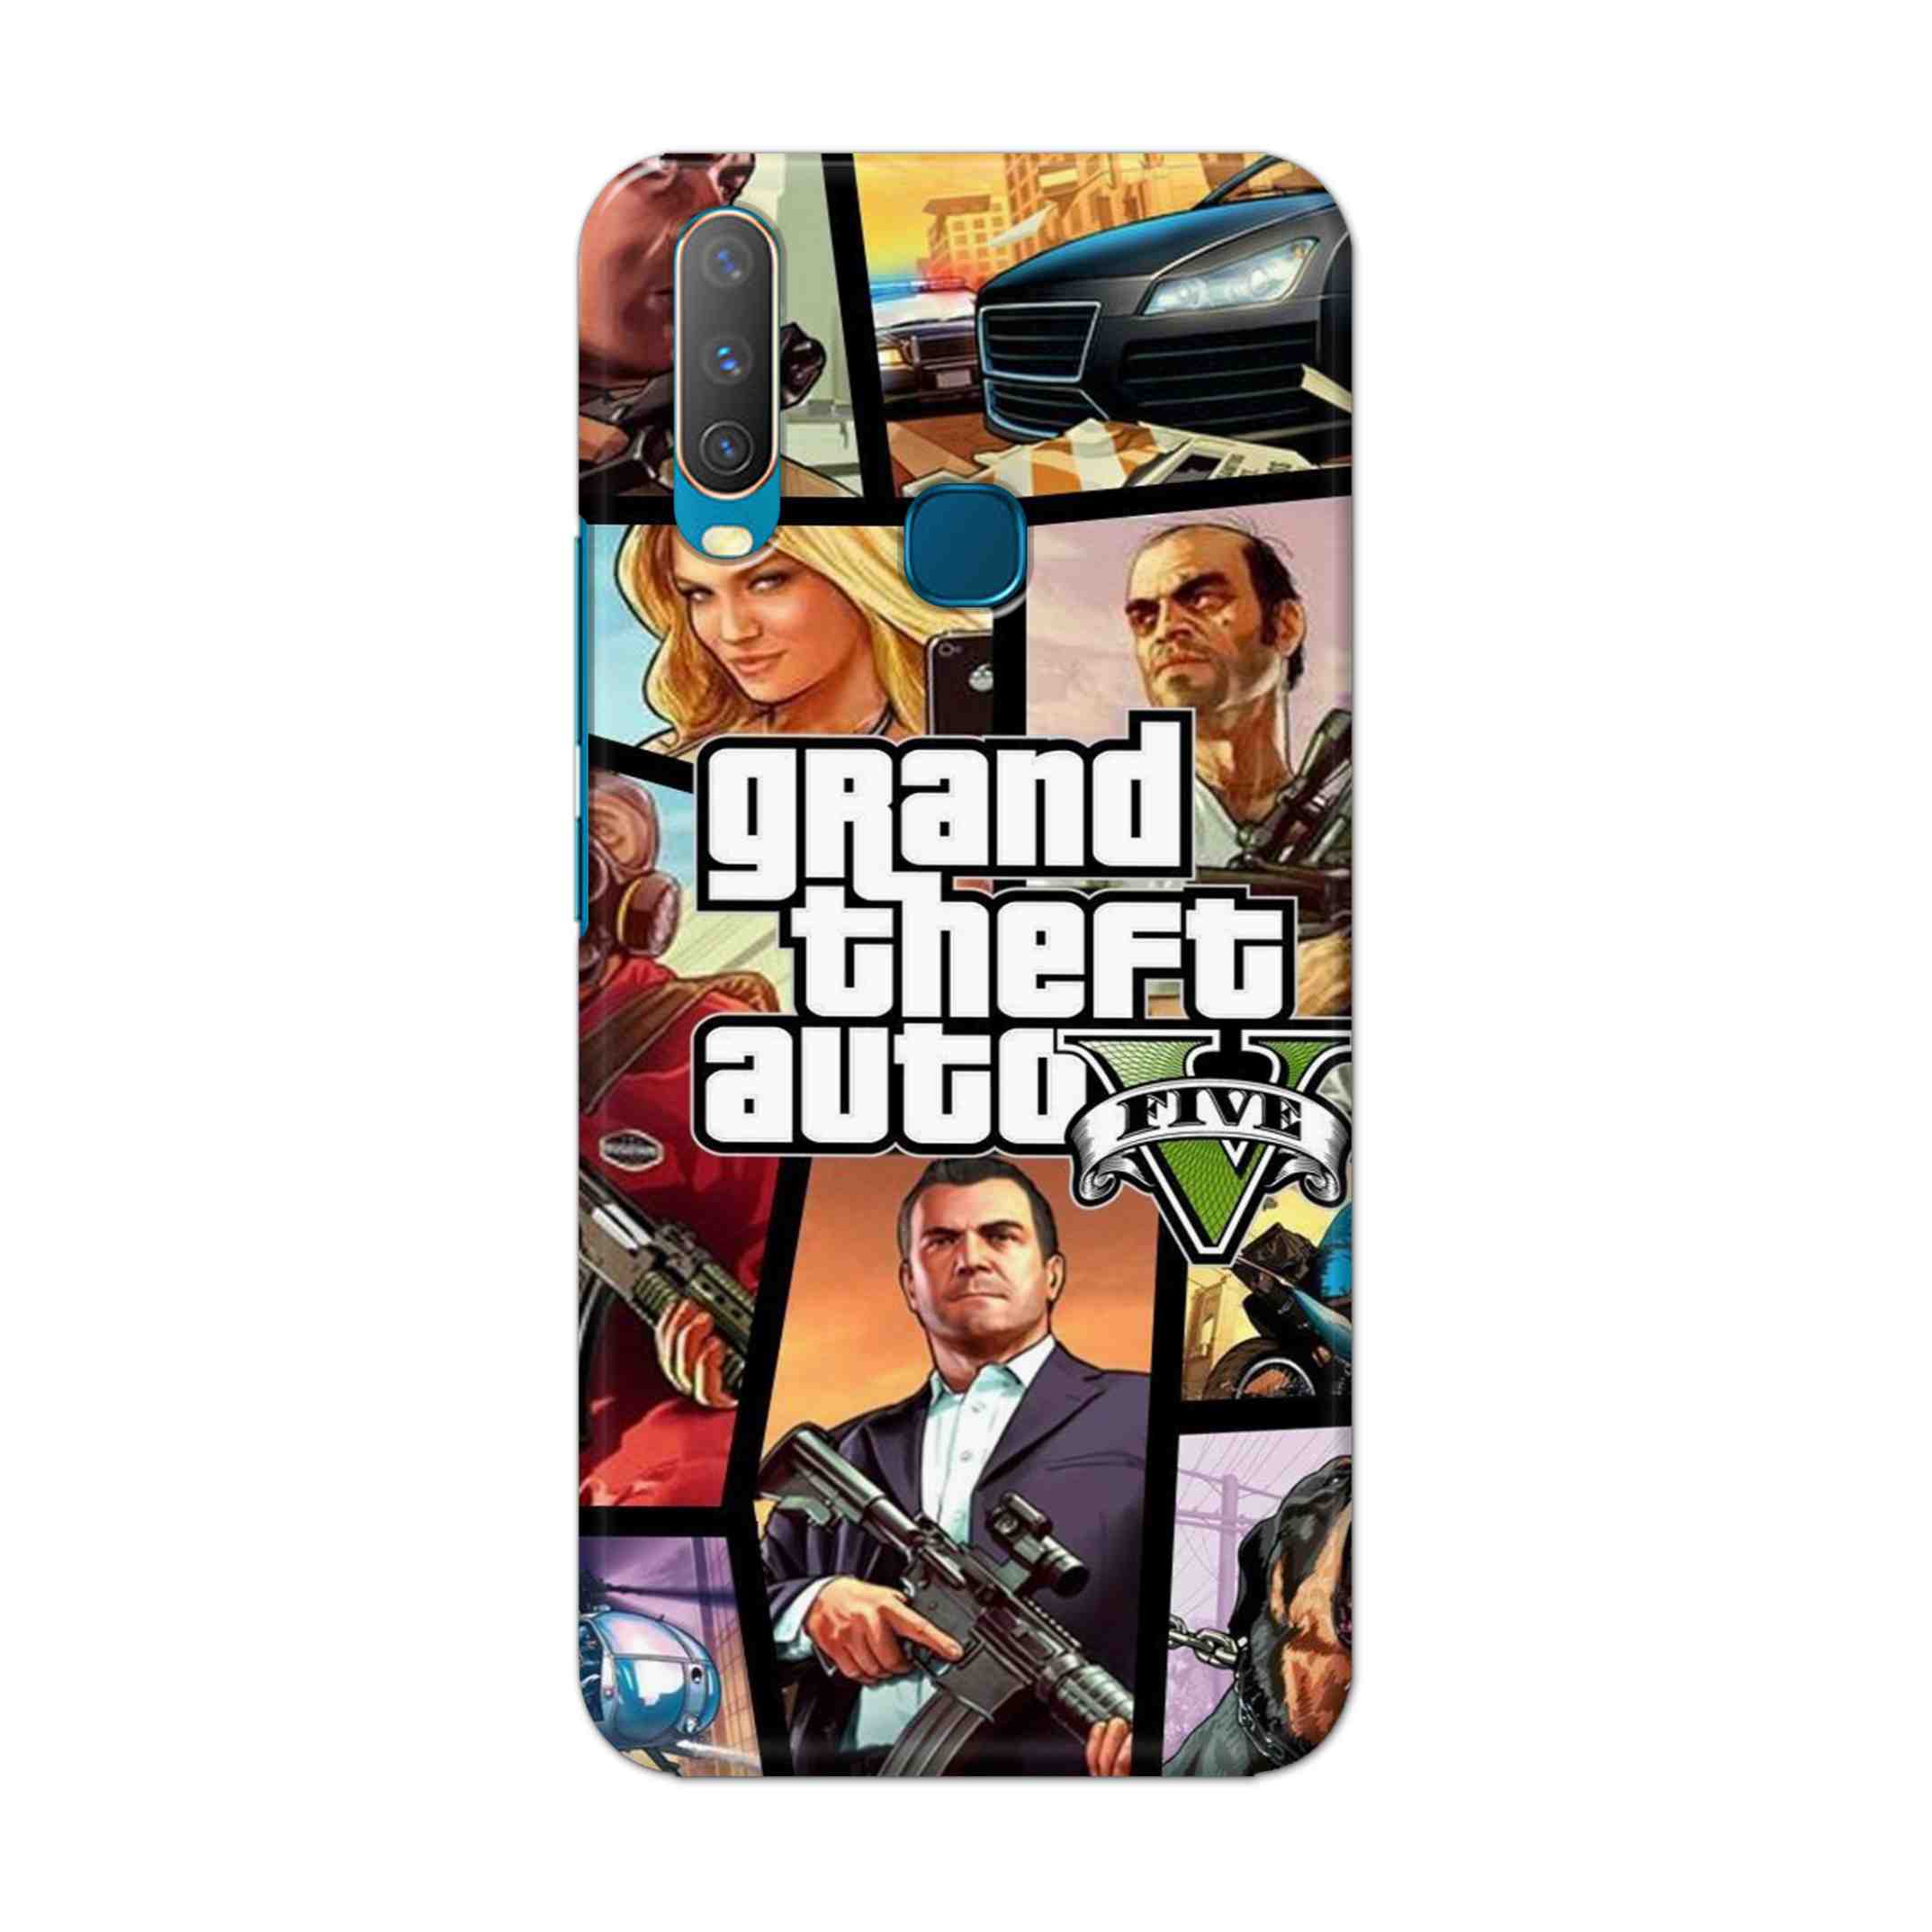 Buy Grand Theft Auto 5 Hard Back Mobile Phone Case Cover For Vivo Y17 / U10 Online